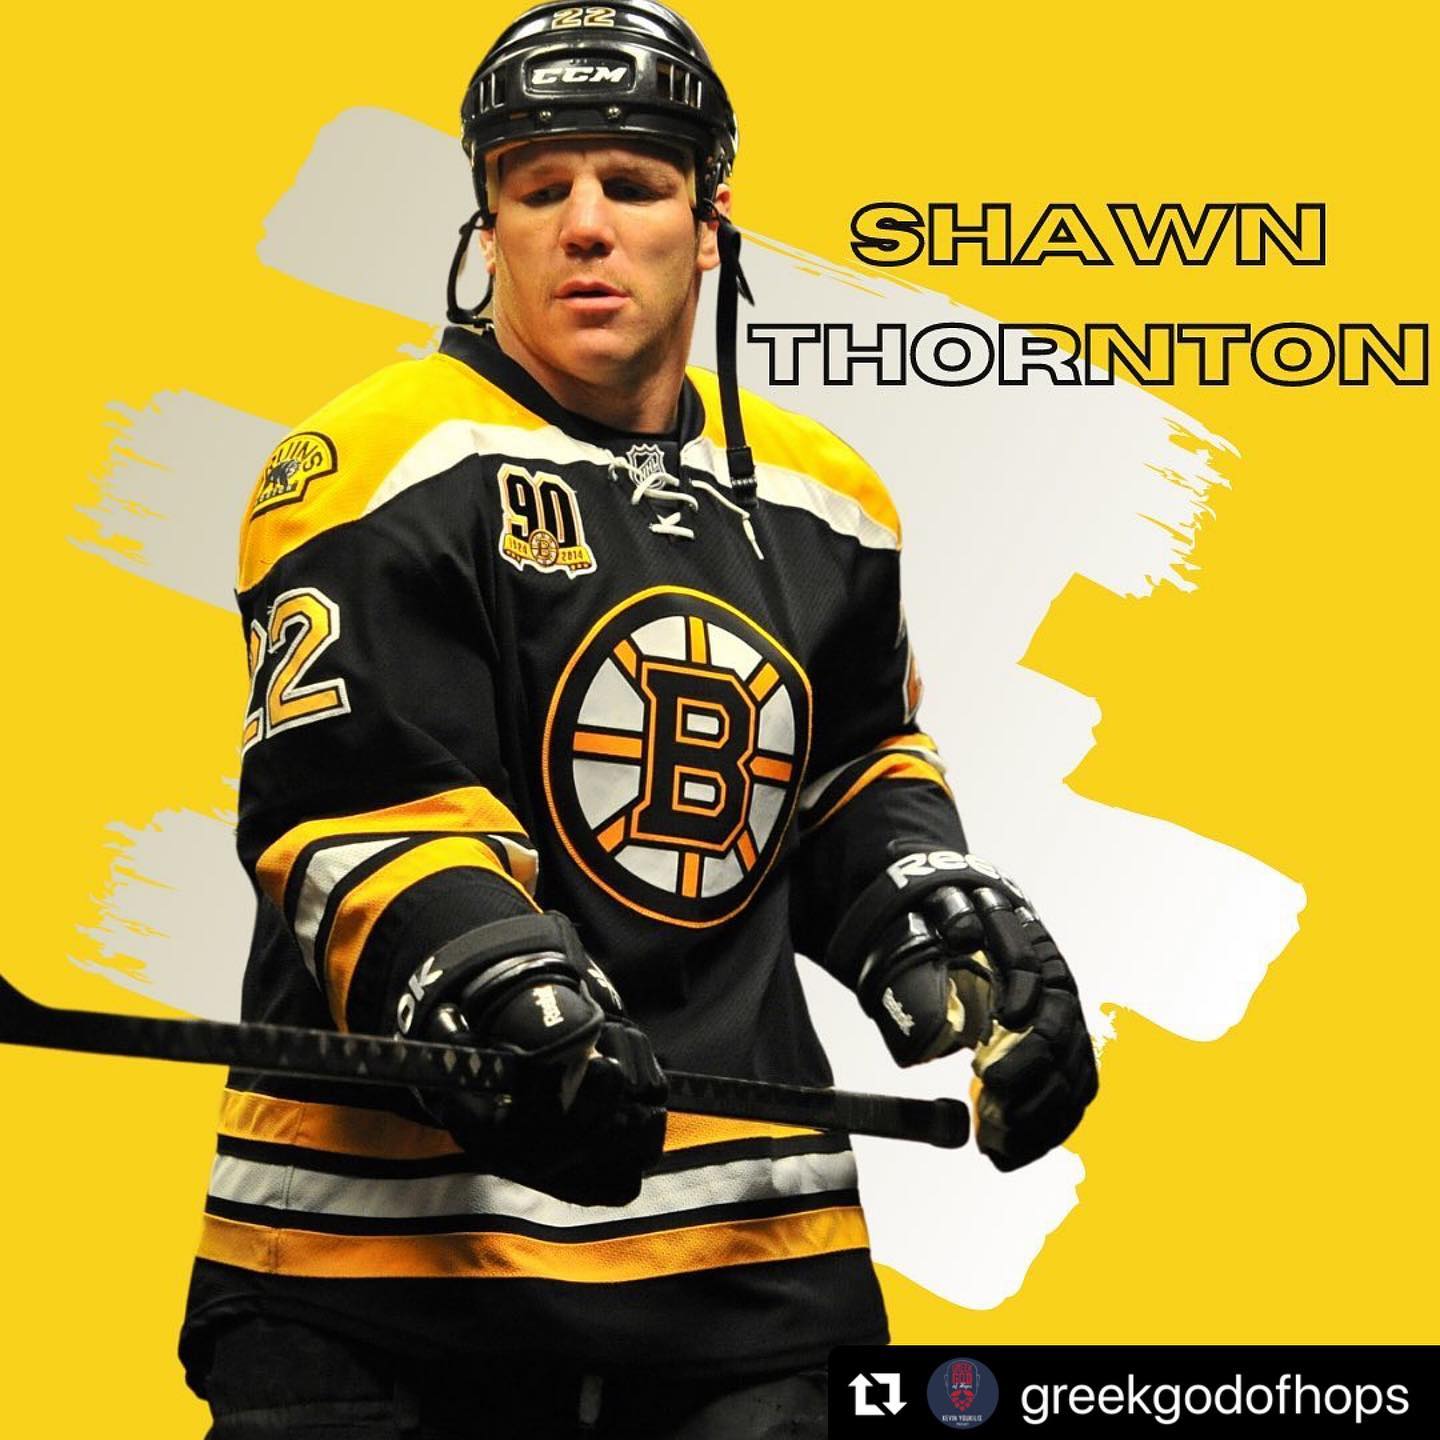 @greekgodofhops ・・・
This week hockey legend Shawn Thornton joins us just in time for hockey’s return! Have questions for Shawn? DM us or submit to www.ggohpodcast.com/contact